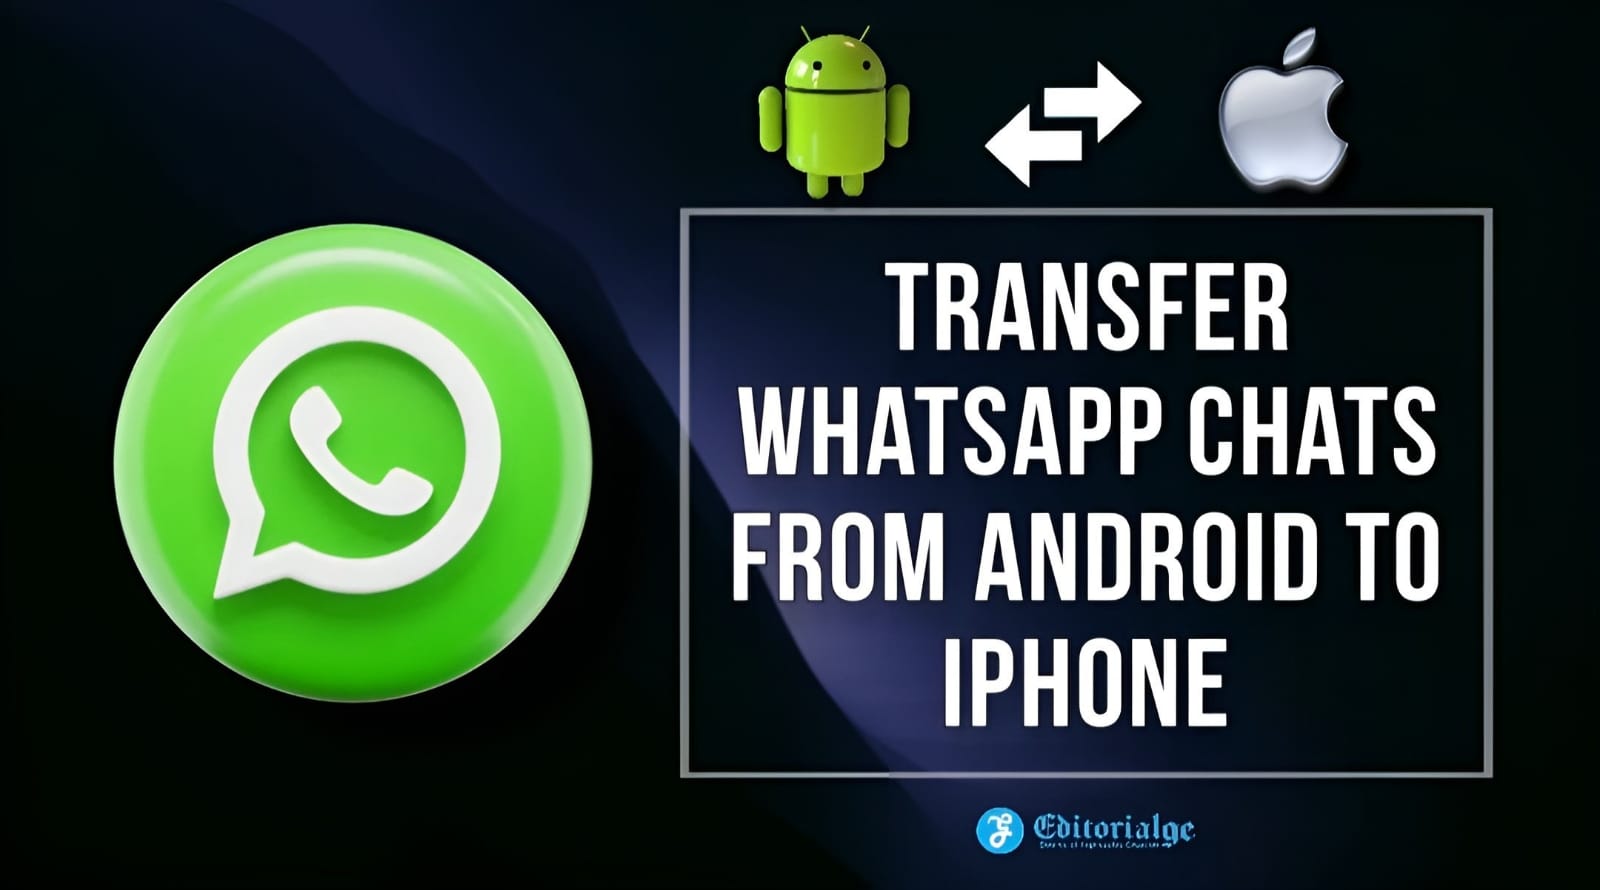 Transfer WhatsApp Chats from Android to iPhone